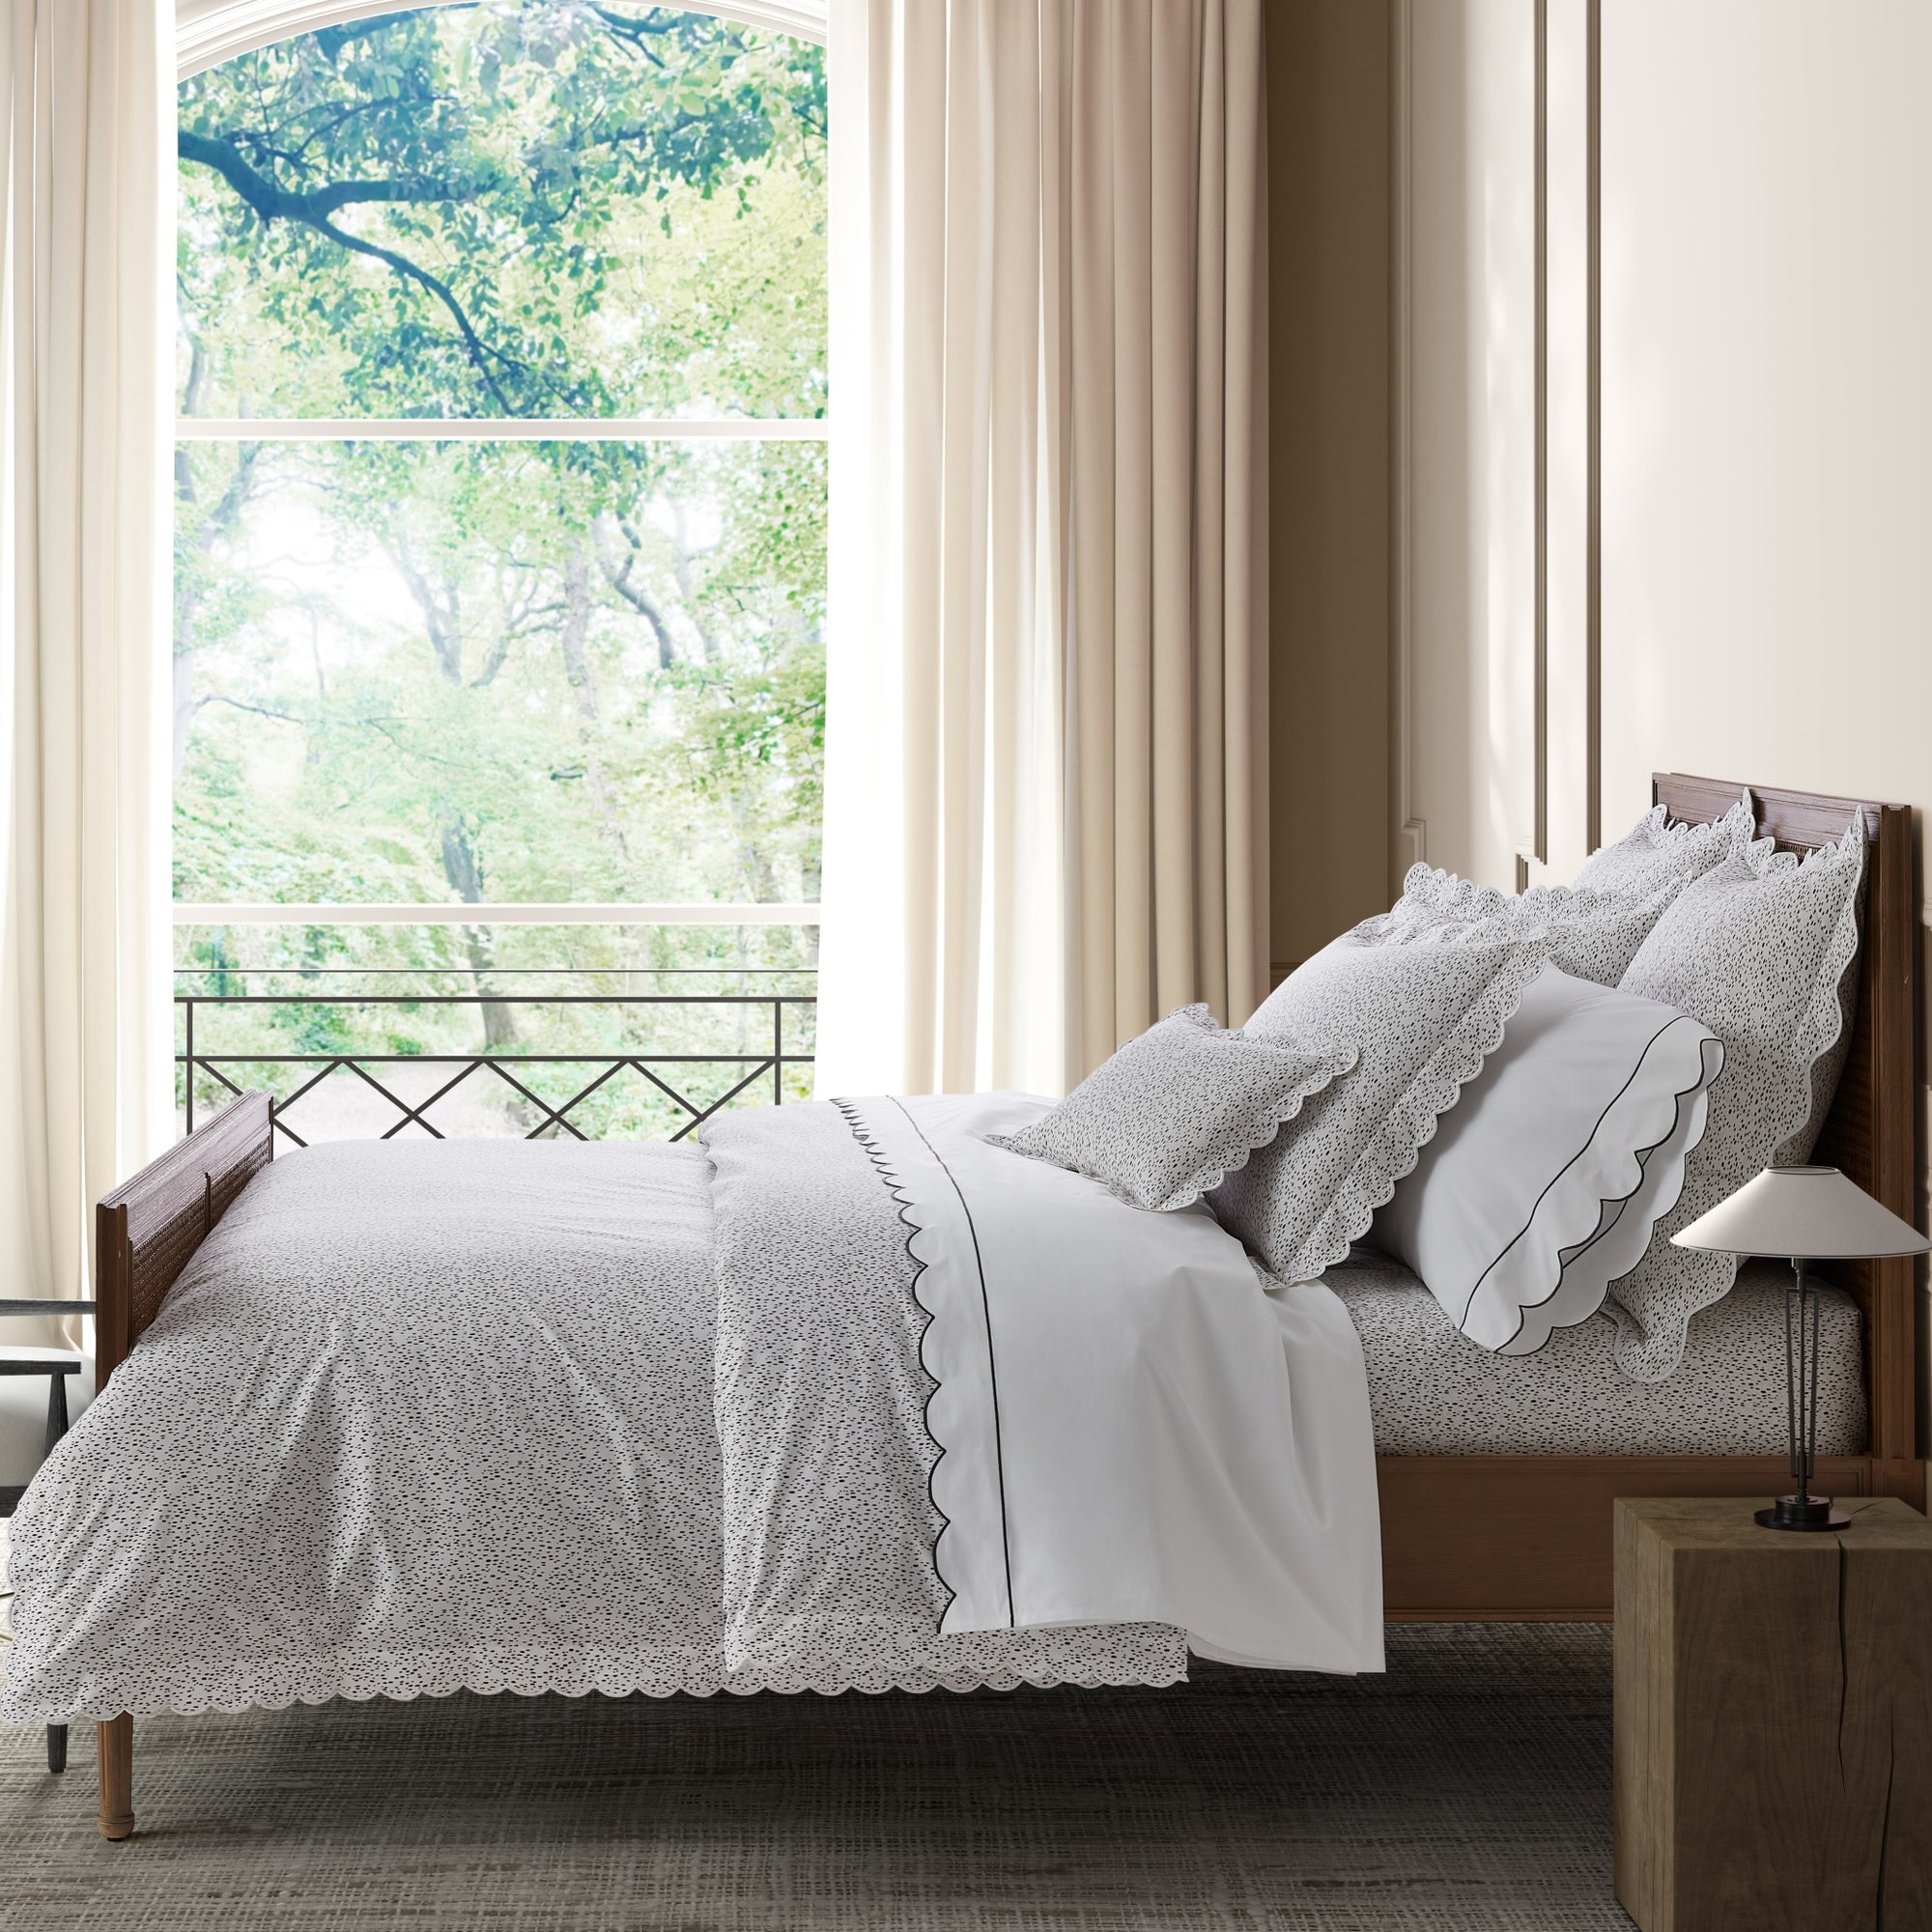 Full View of Matouk Celine Bedding in Charcoal Color